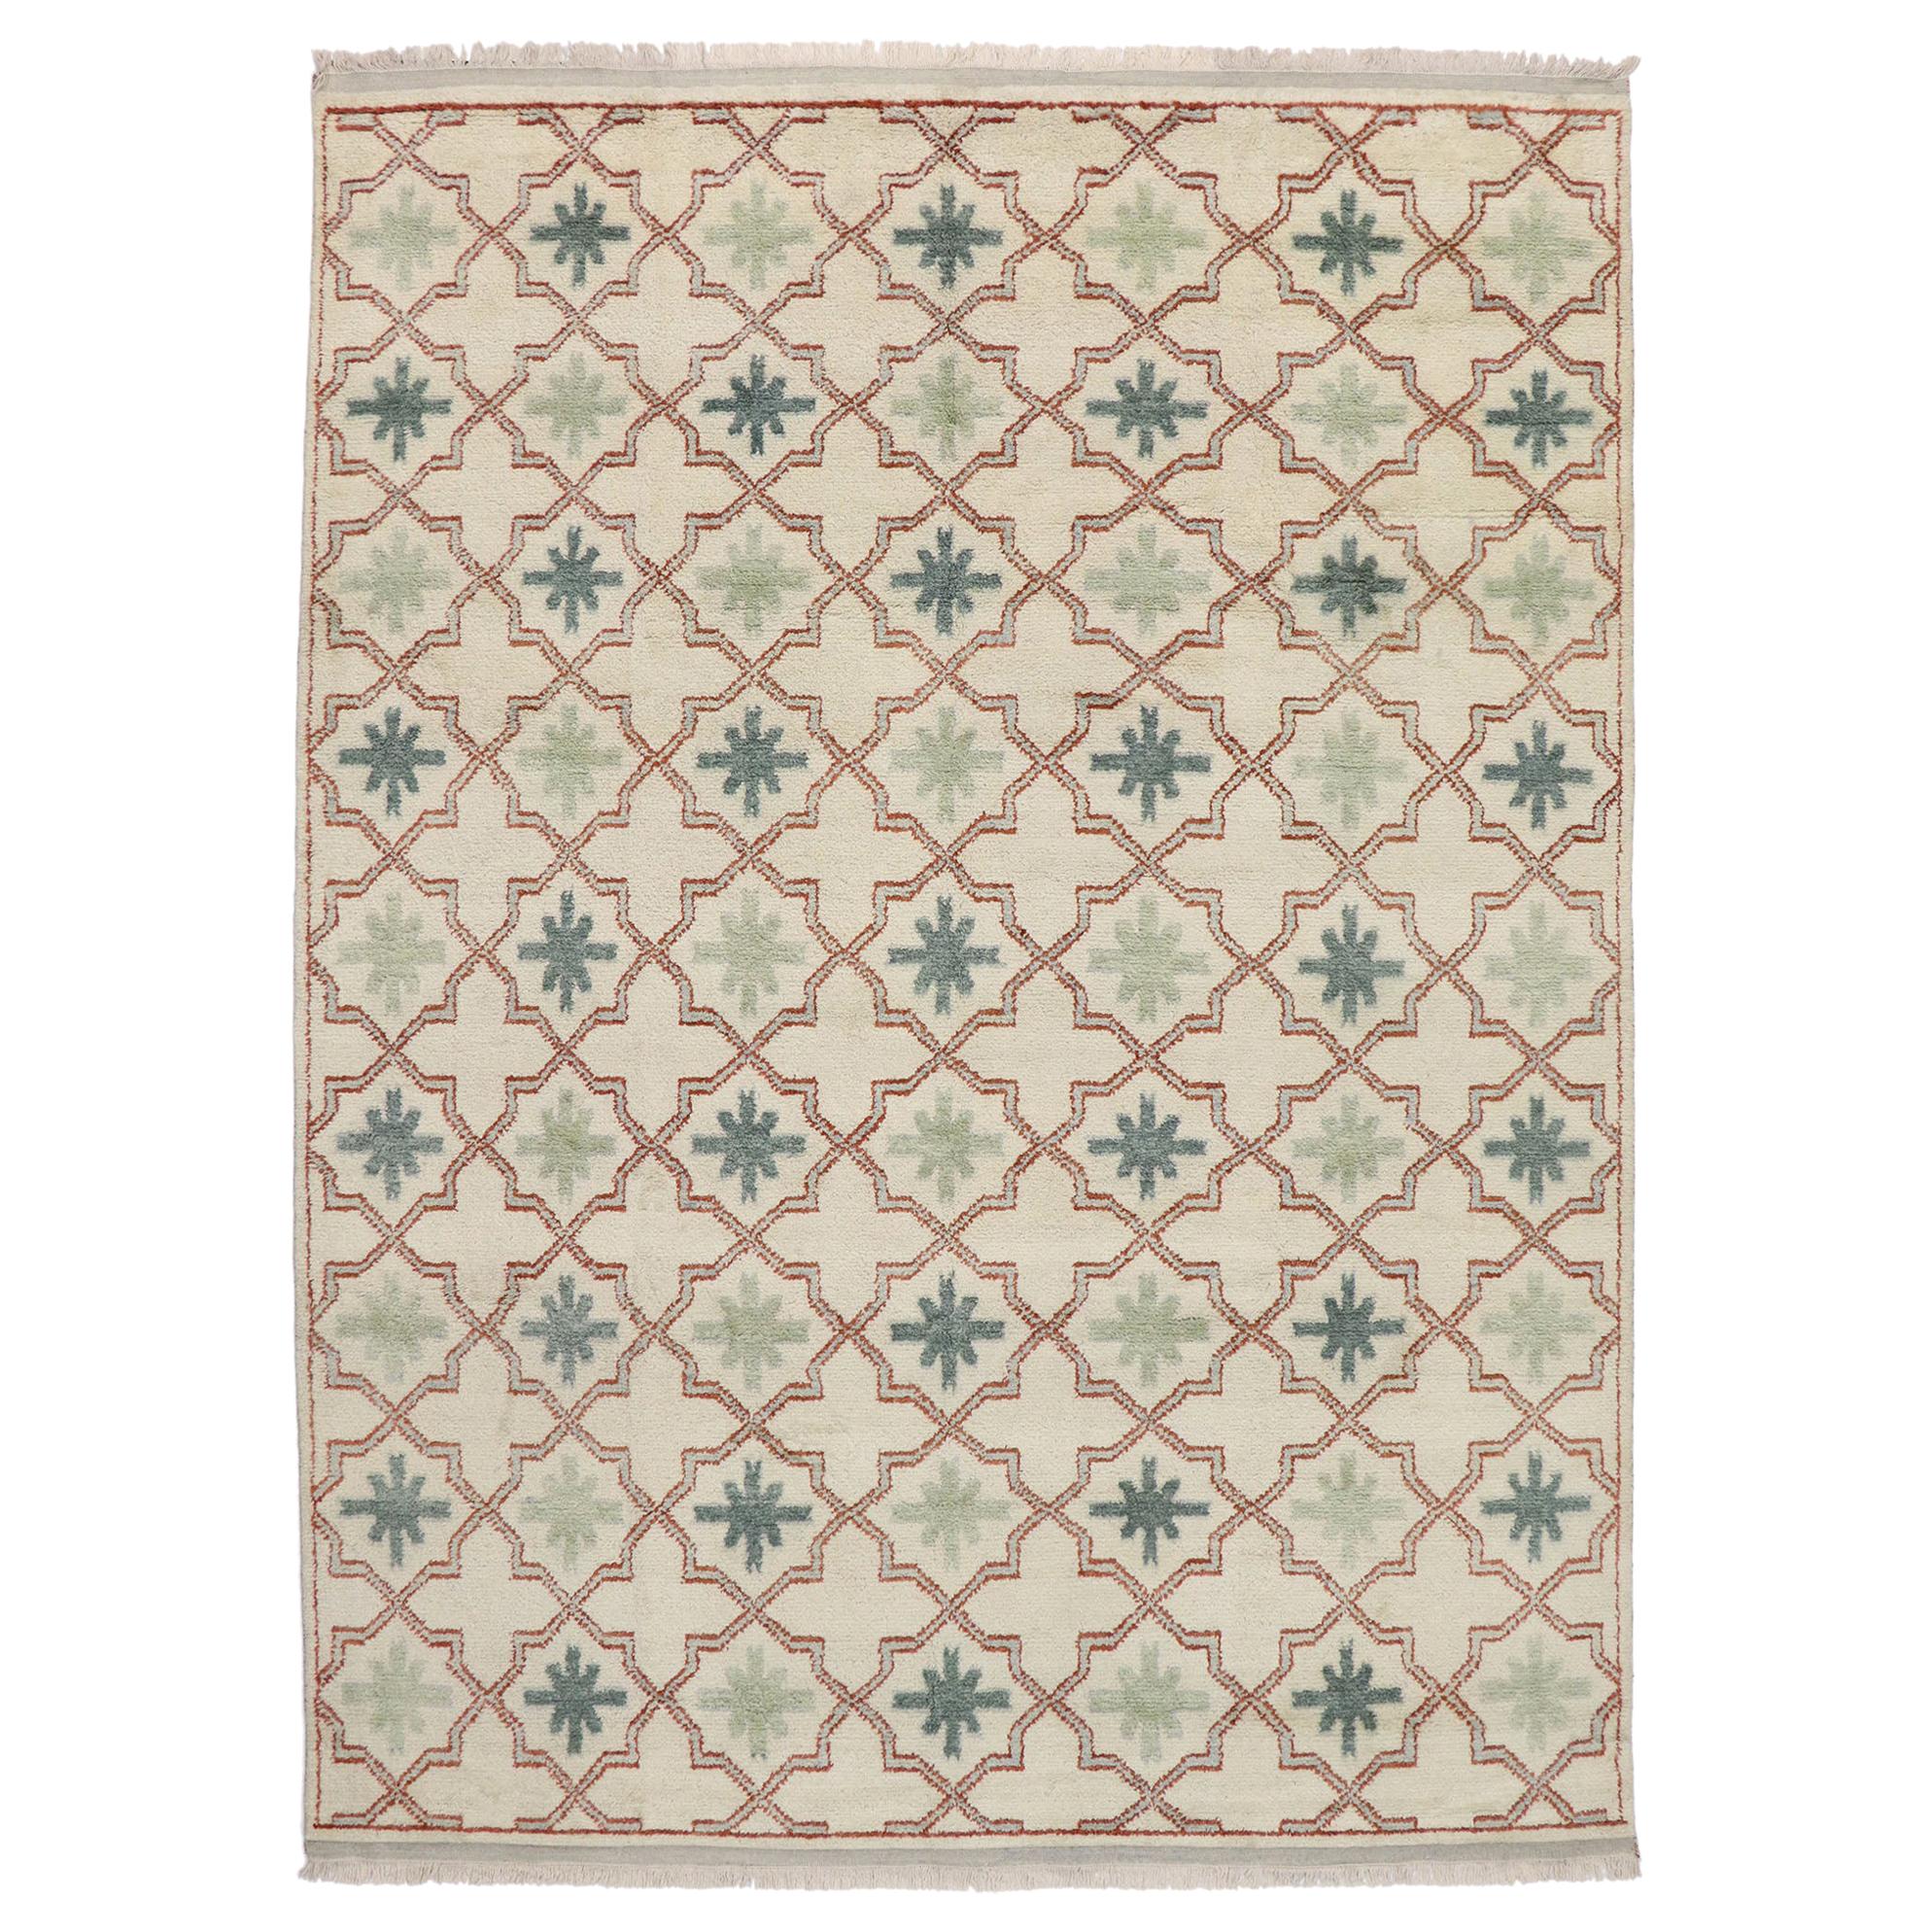 New Contemporary Moroccan Rug with Modern Mediterranean Style